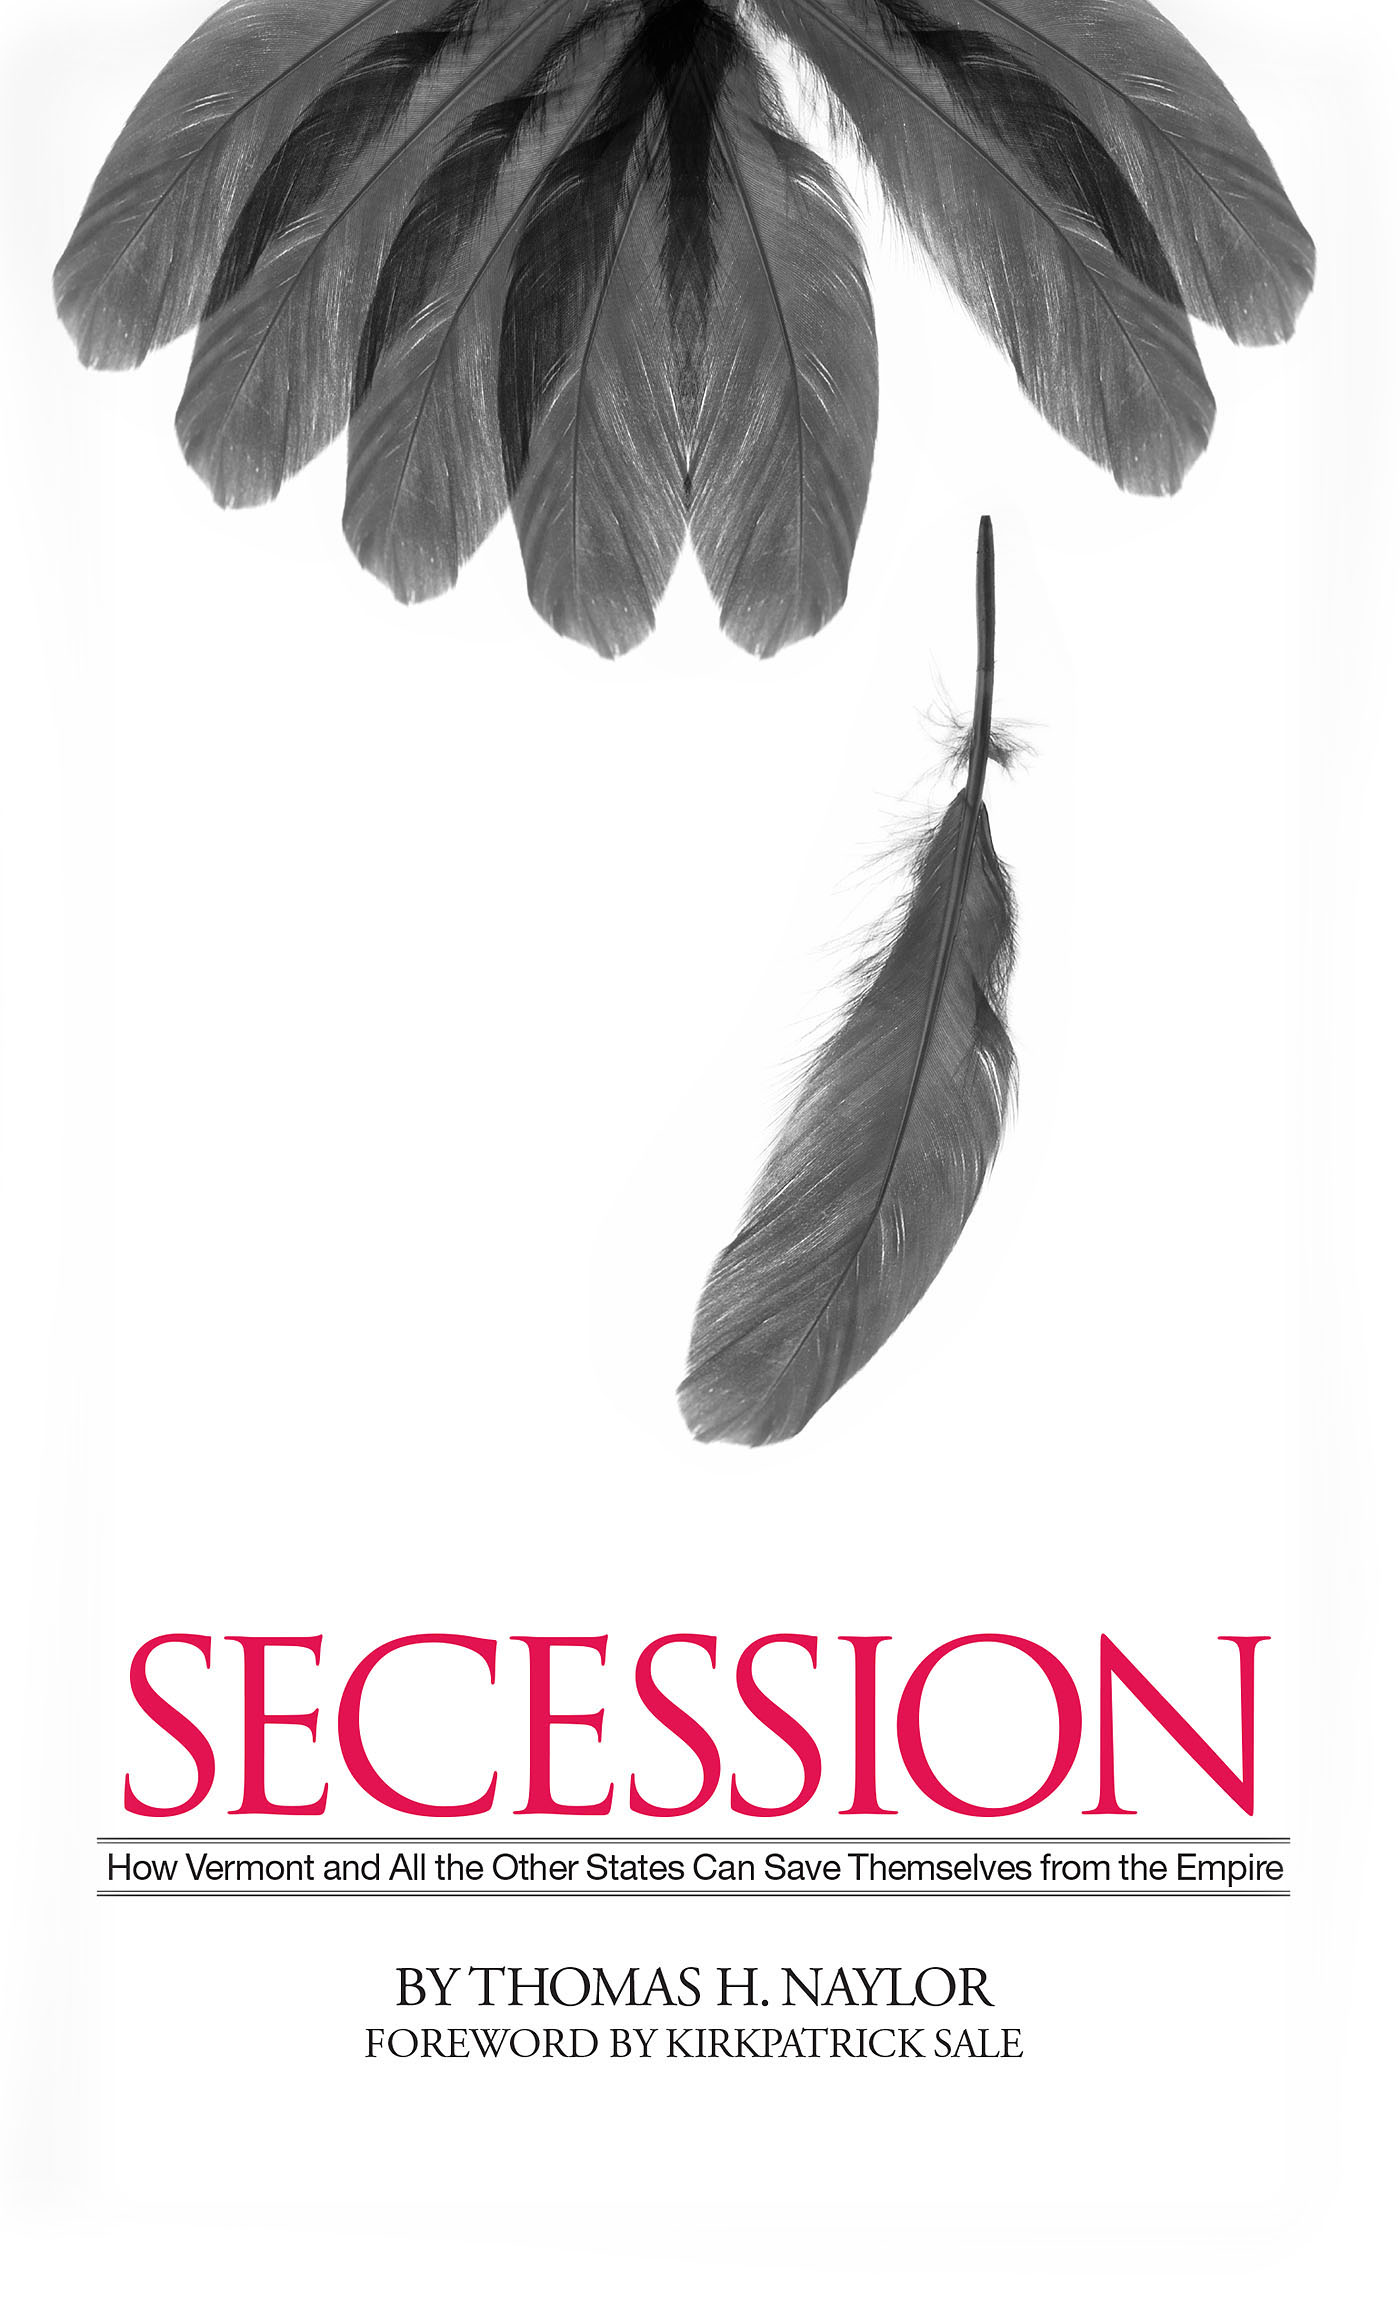 book cover feral house secession how vermont other states save themselves from empire